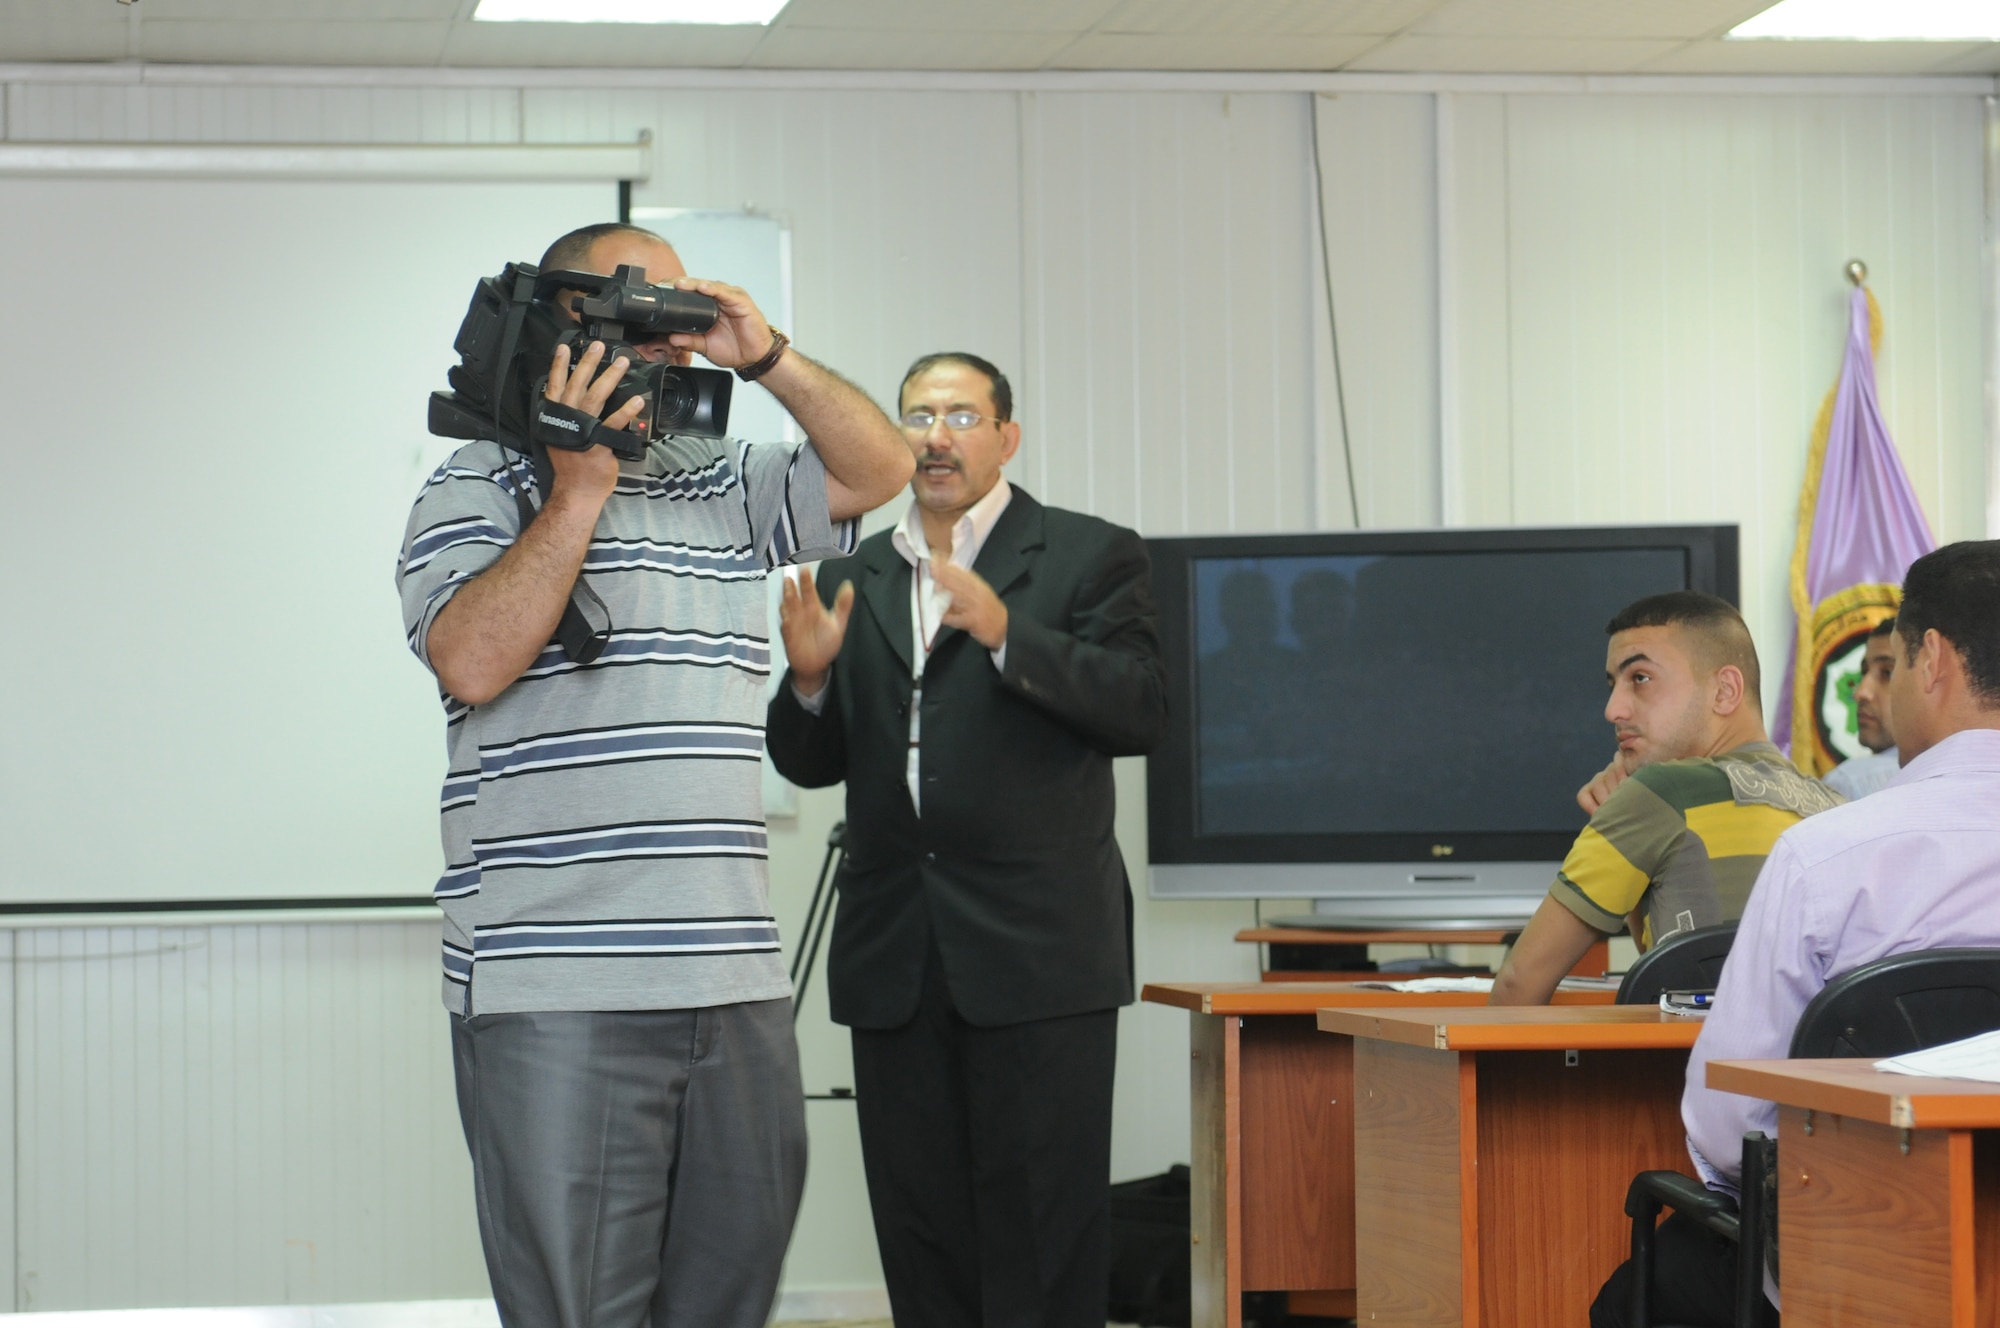 BAGHDAD - Qais Subhie Mustafa, who works for the Chief of Staff of the Department of Media and relations and is the Instructor for the Iraqi Ministry of Defense’s Advanced Broadcasting and Television Production Workshop, teaches the class the different aspects of using a video camera at the MoD’s Ministerial Developmental and Training Center here Feb. 28. The first advanced iteration of the workshop graduated March 2. (U.S. Army photo/Spc. Breeanna DuBuke)